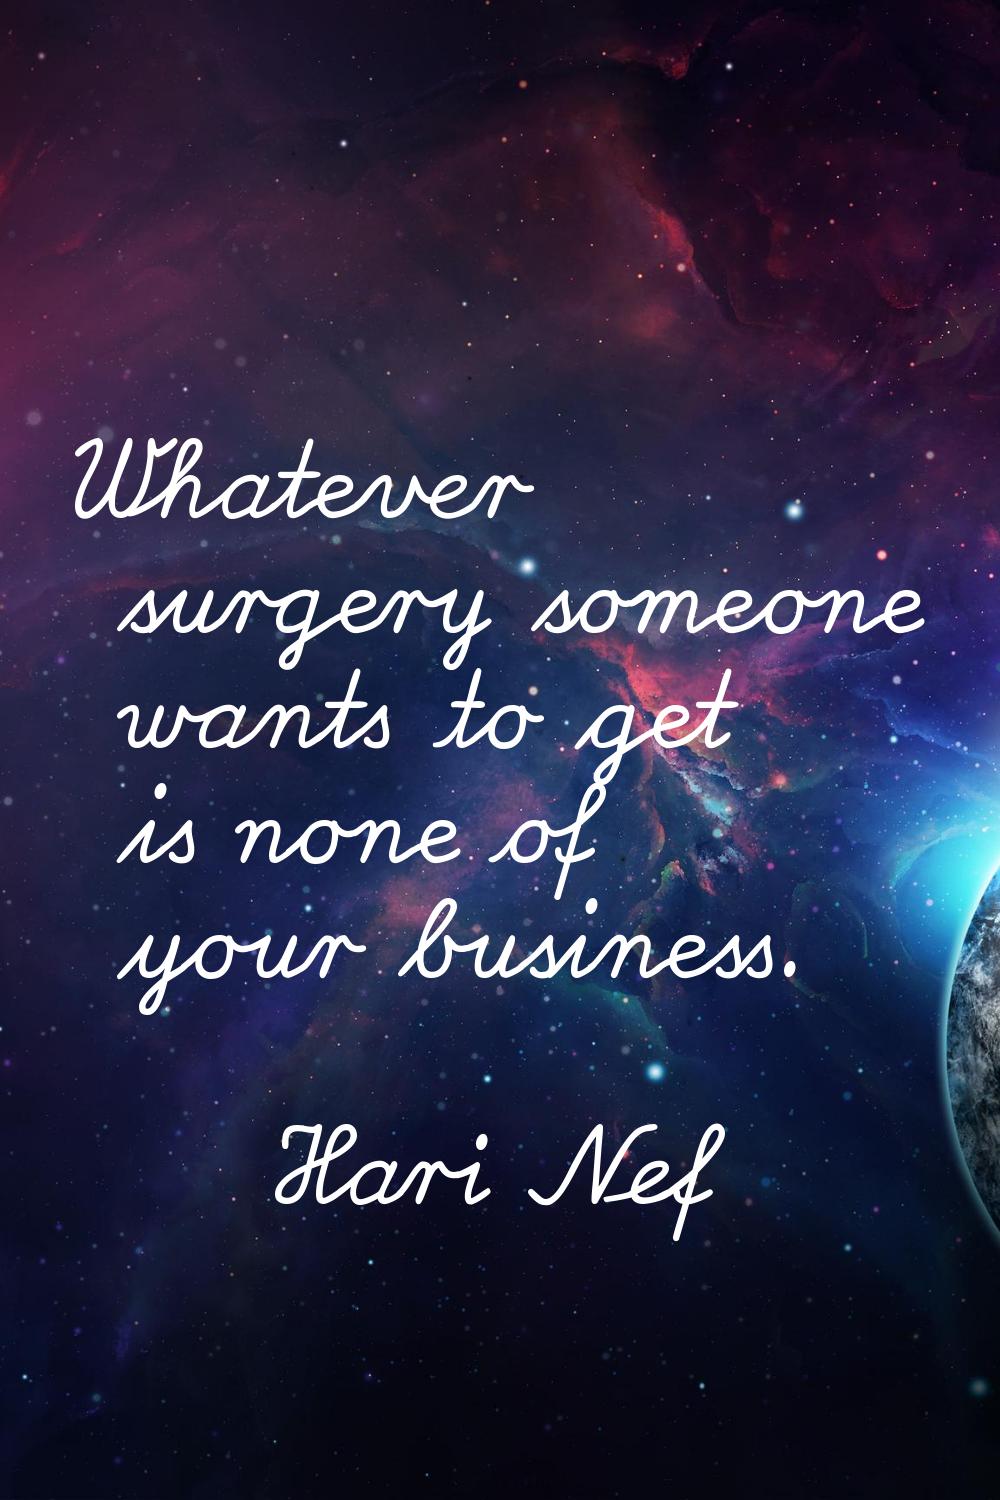 Whatever surgery someone wants to get is none of your business.